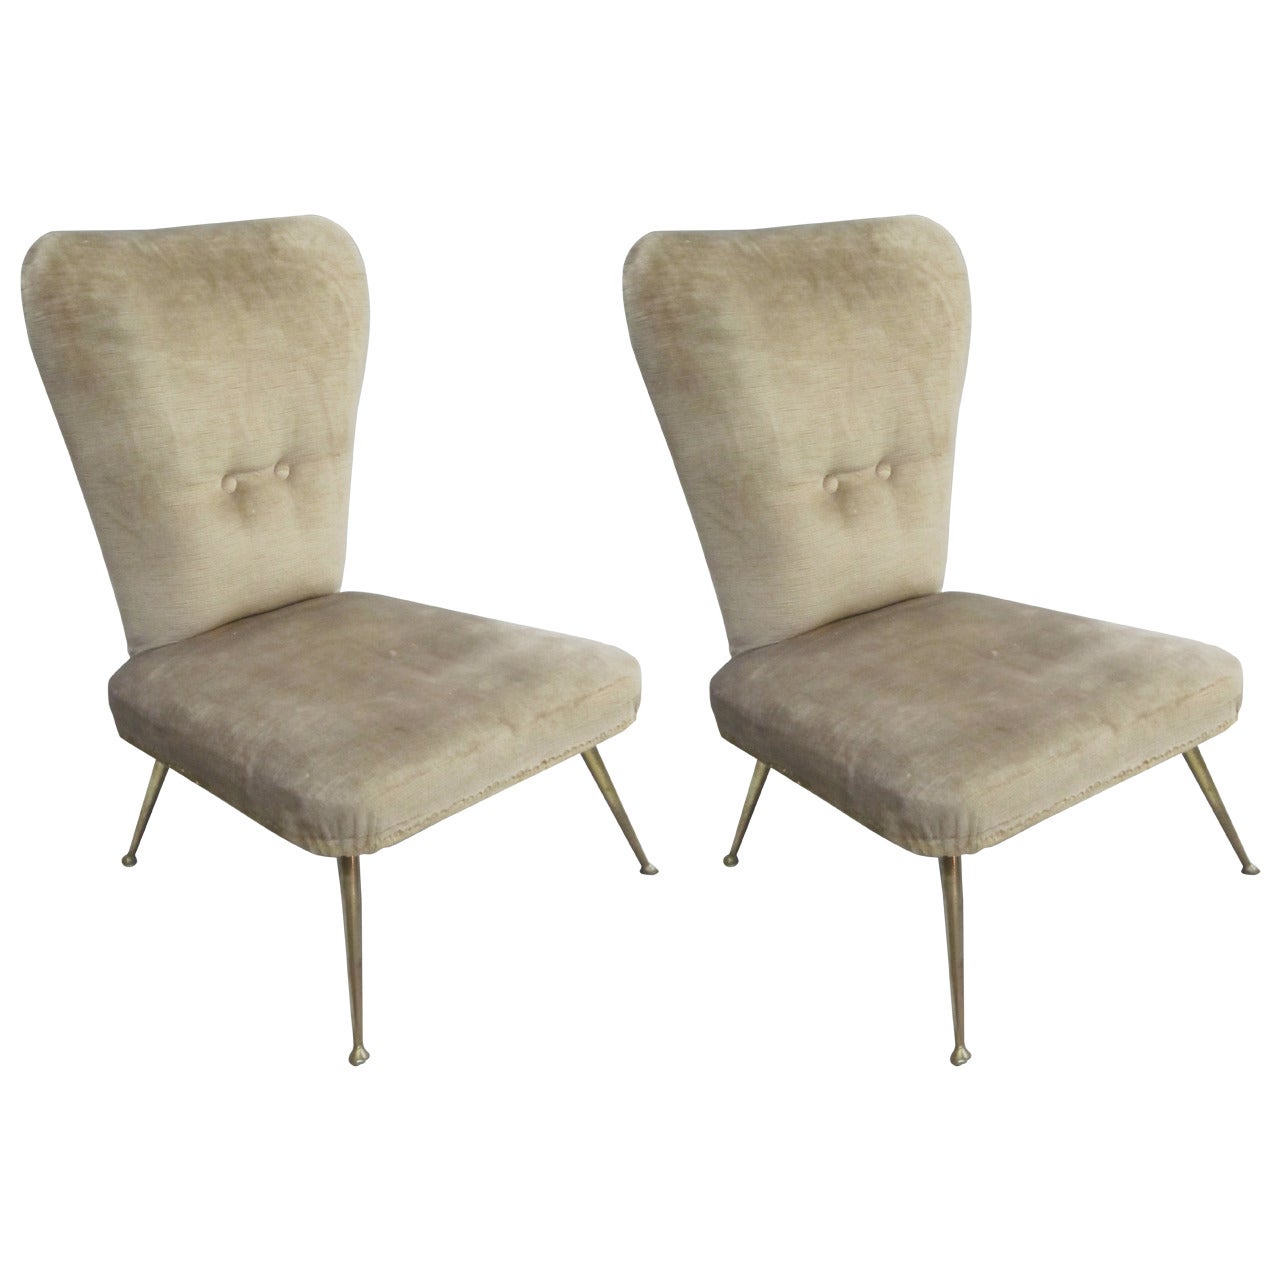 Pair of Mid-Century Modern Slipper or Lounge Chairs Attributed to Marco Zanuso